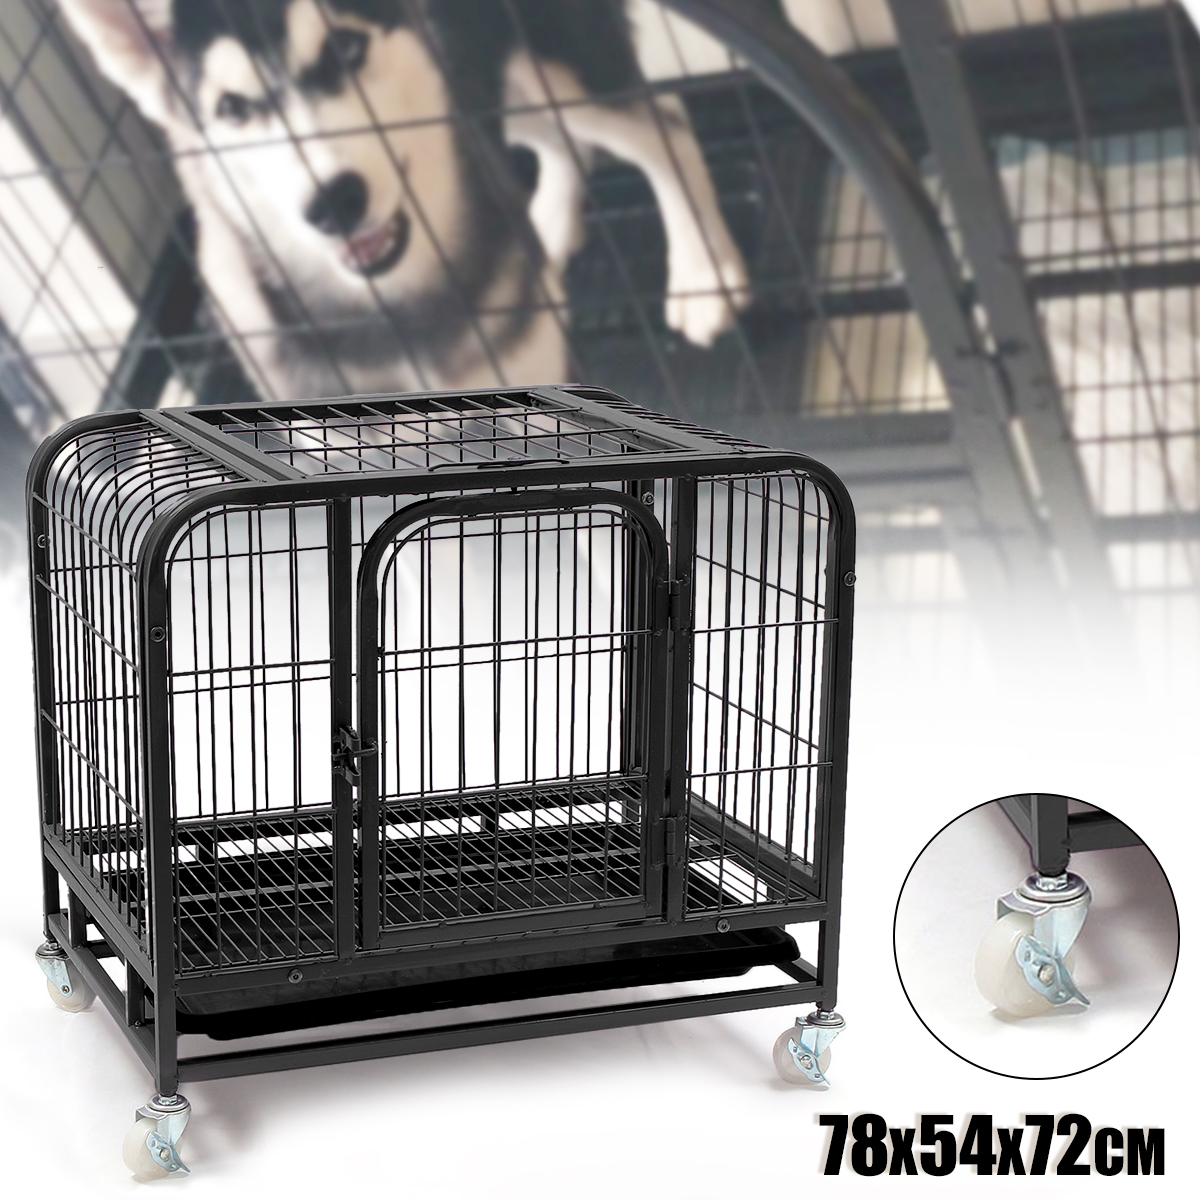 31-Dog-Crate-Cage-2-Doors-Cat-Pet-Poodle-Heavy-Duty-Cage-Puppy-Kennel-House--Tray-with-Four-Wheels-1961041-2